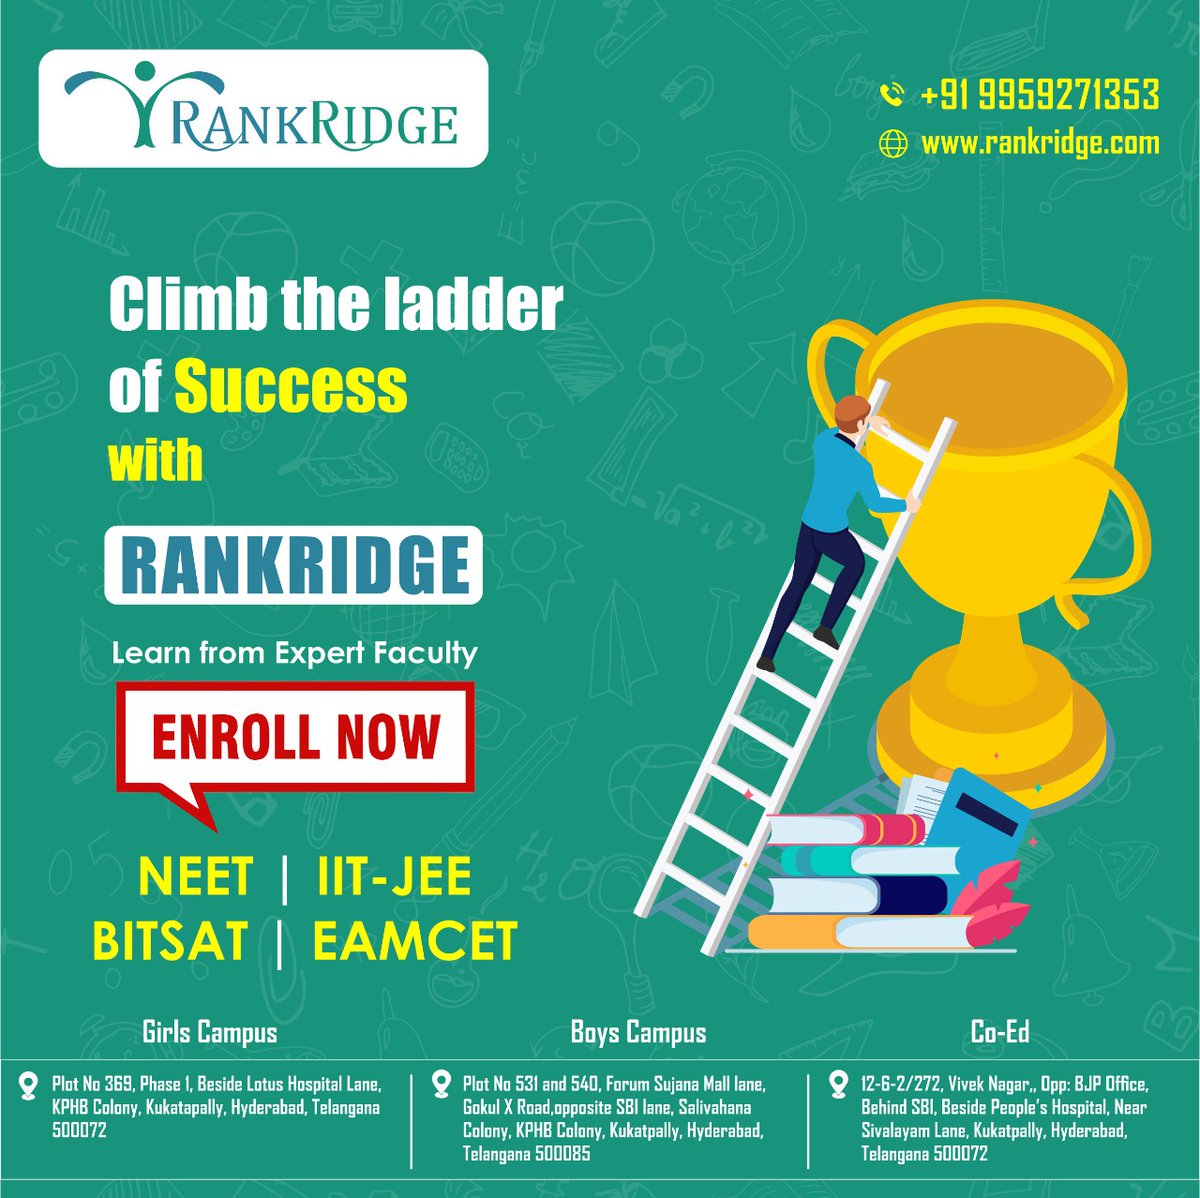 Enroll Now for NEET, IIT-JEE, BITSAT, EAMCET at rankridge.com

#rankridge #iitjee #neet #eamcet #bitsat #neet2022 #neet2023 #competitiveexams #coachingcentre #bestcoachingcentre #coachingcentres #entranceexam #topcoachingcentresinhyderabad #coachinginstitutes